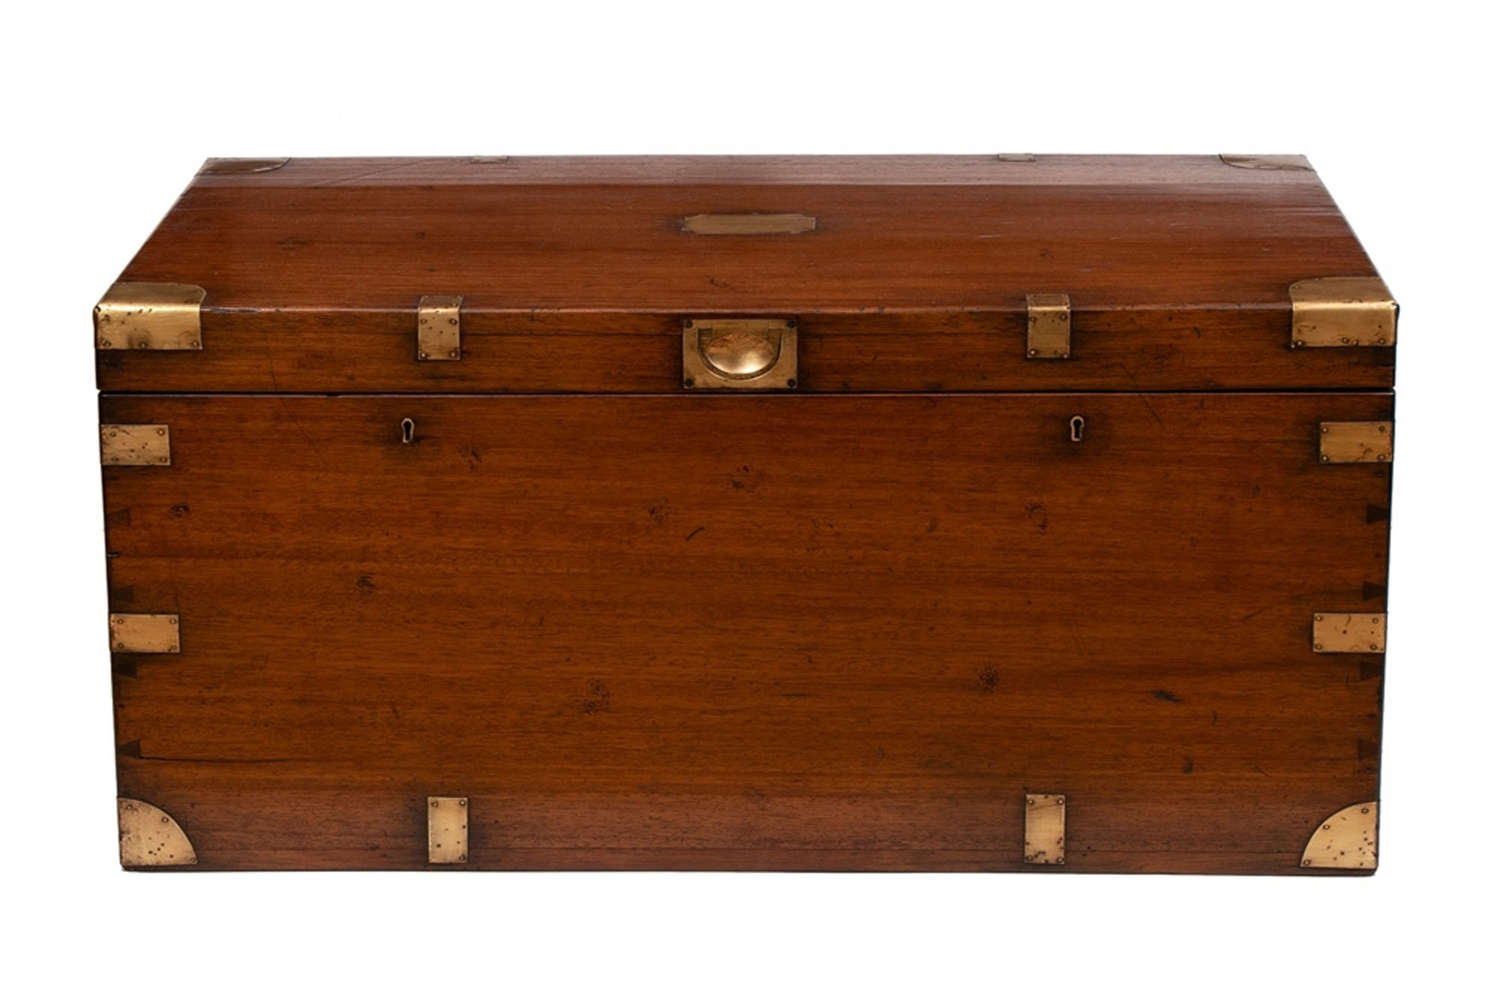 19th Century Military Campaign Trunk